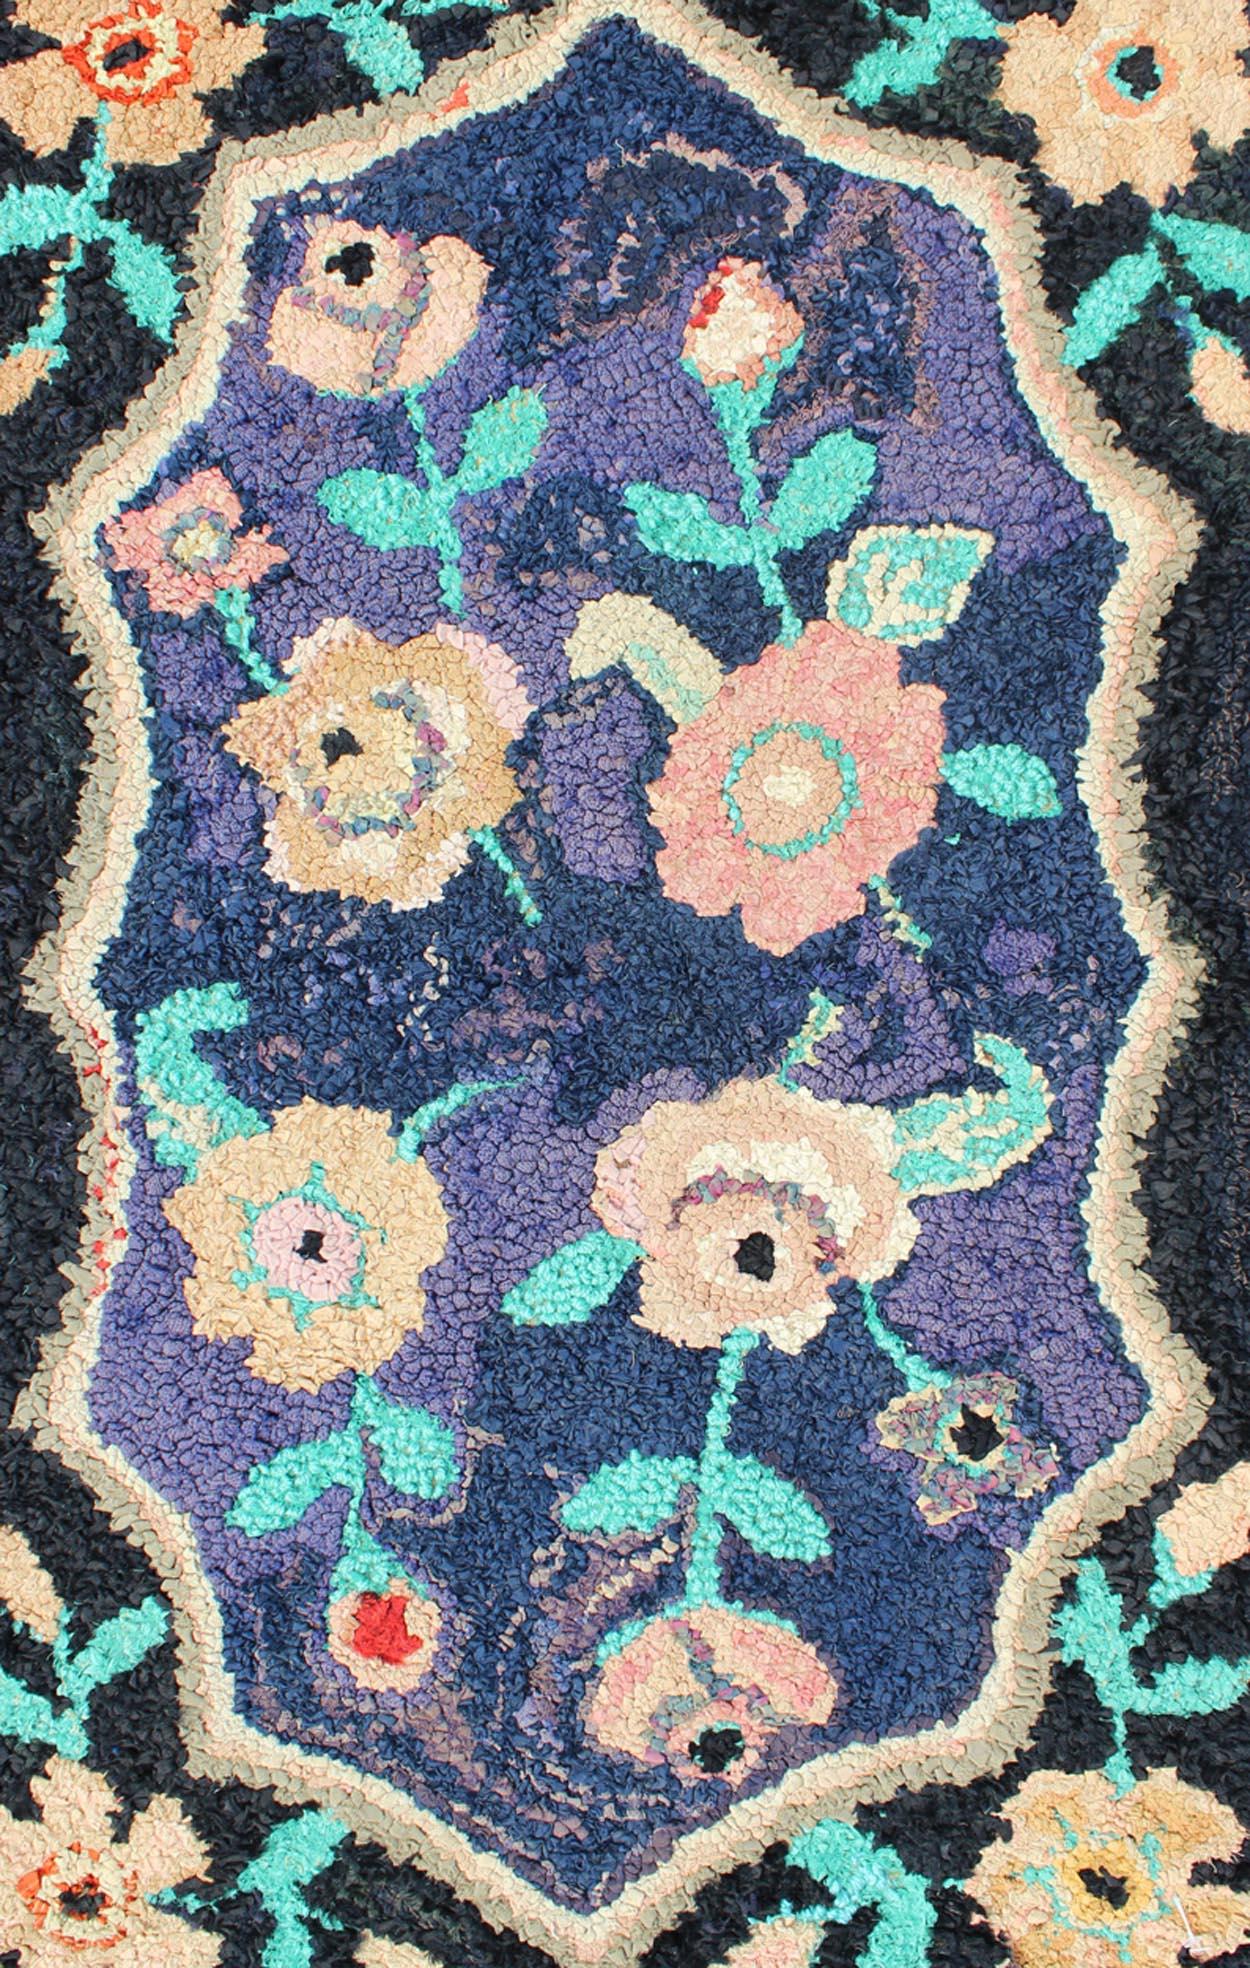 Hand-Woven American Hooked Rug in Floral Pattern with Medallion on Purple/Blue, Black For Sale